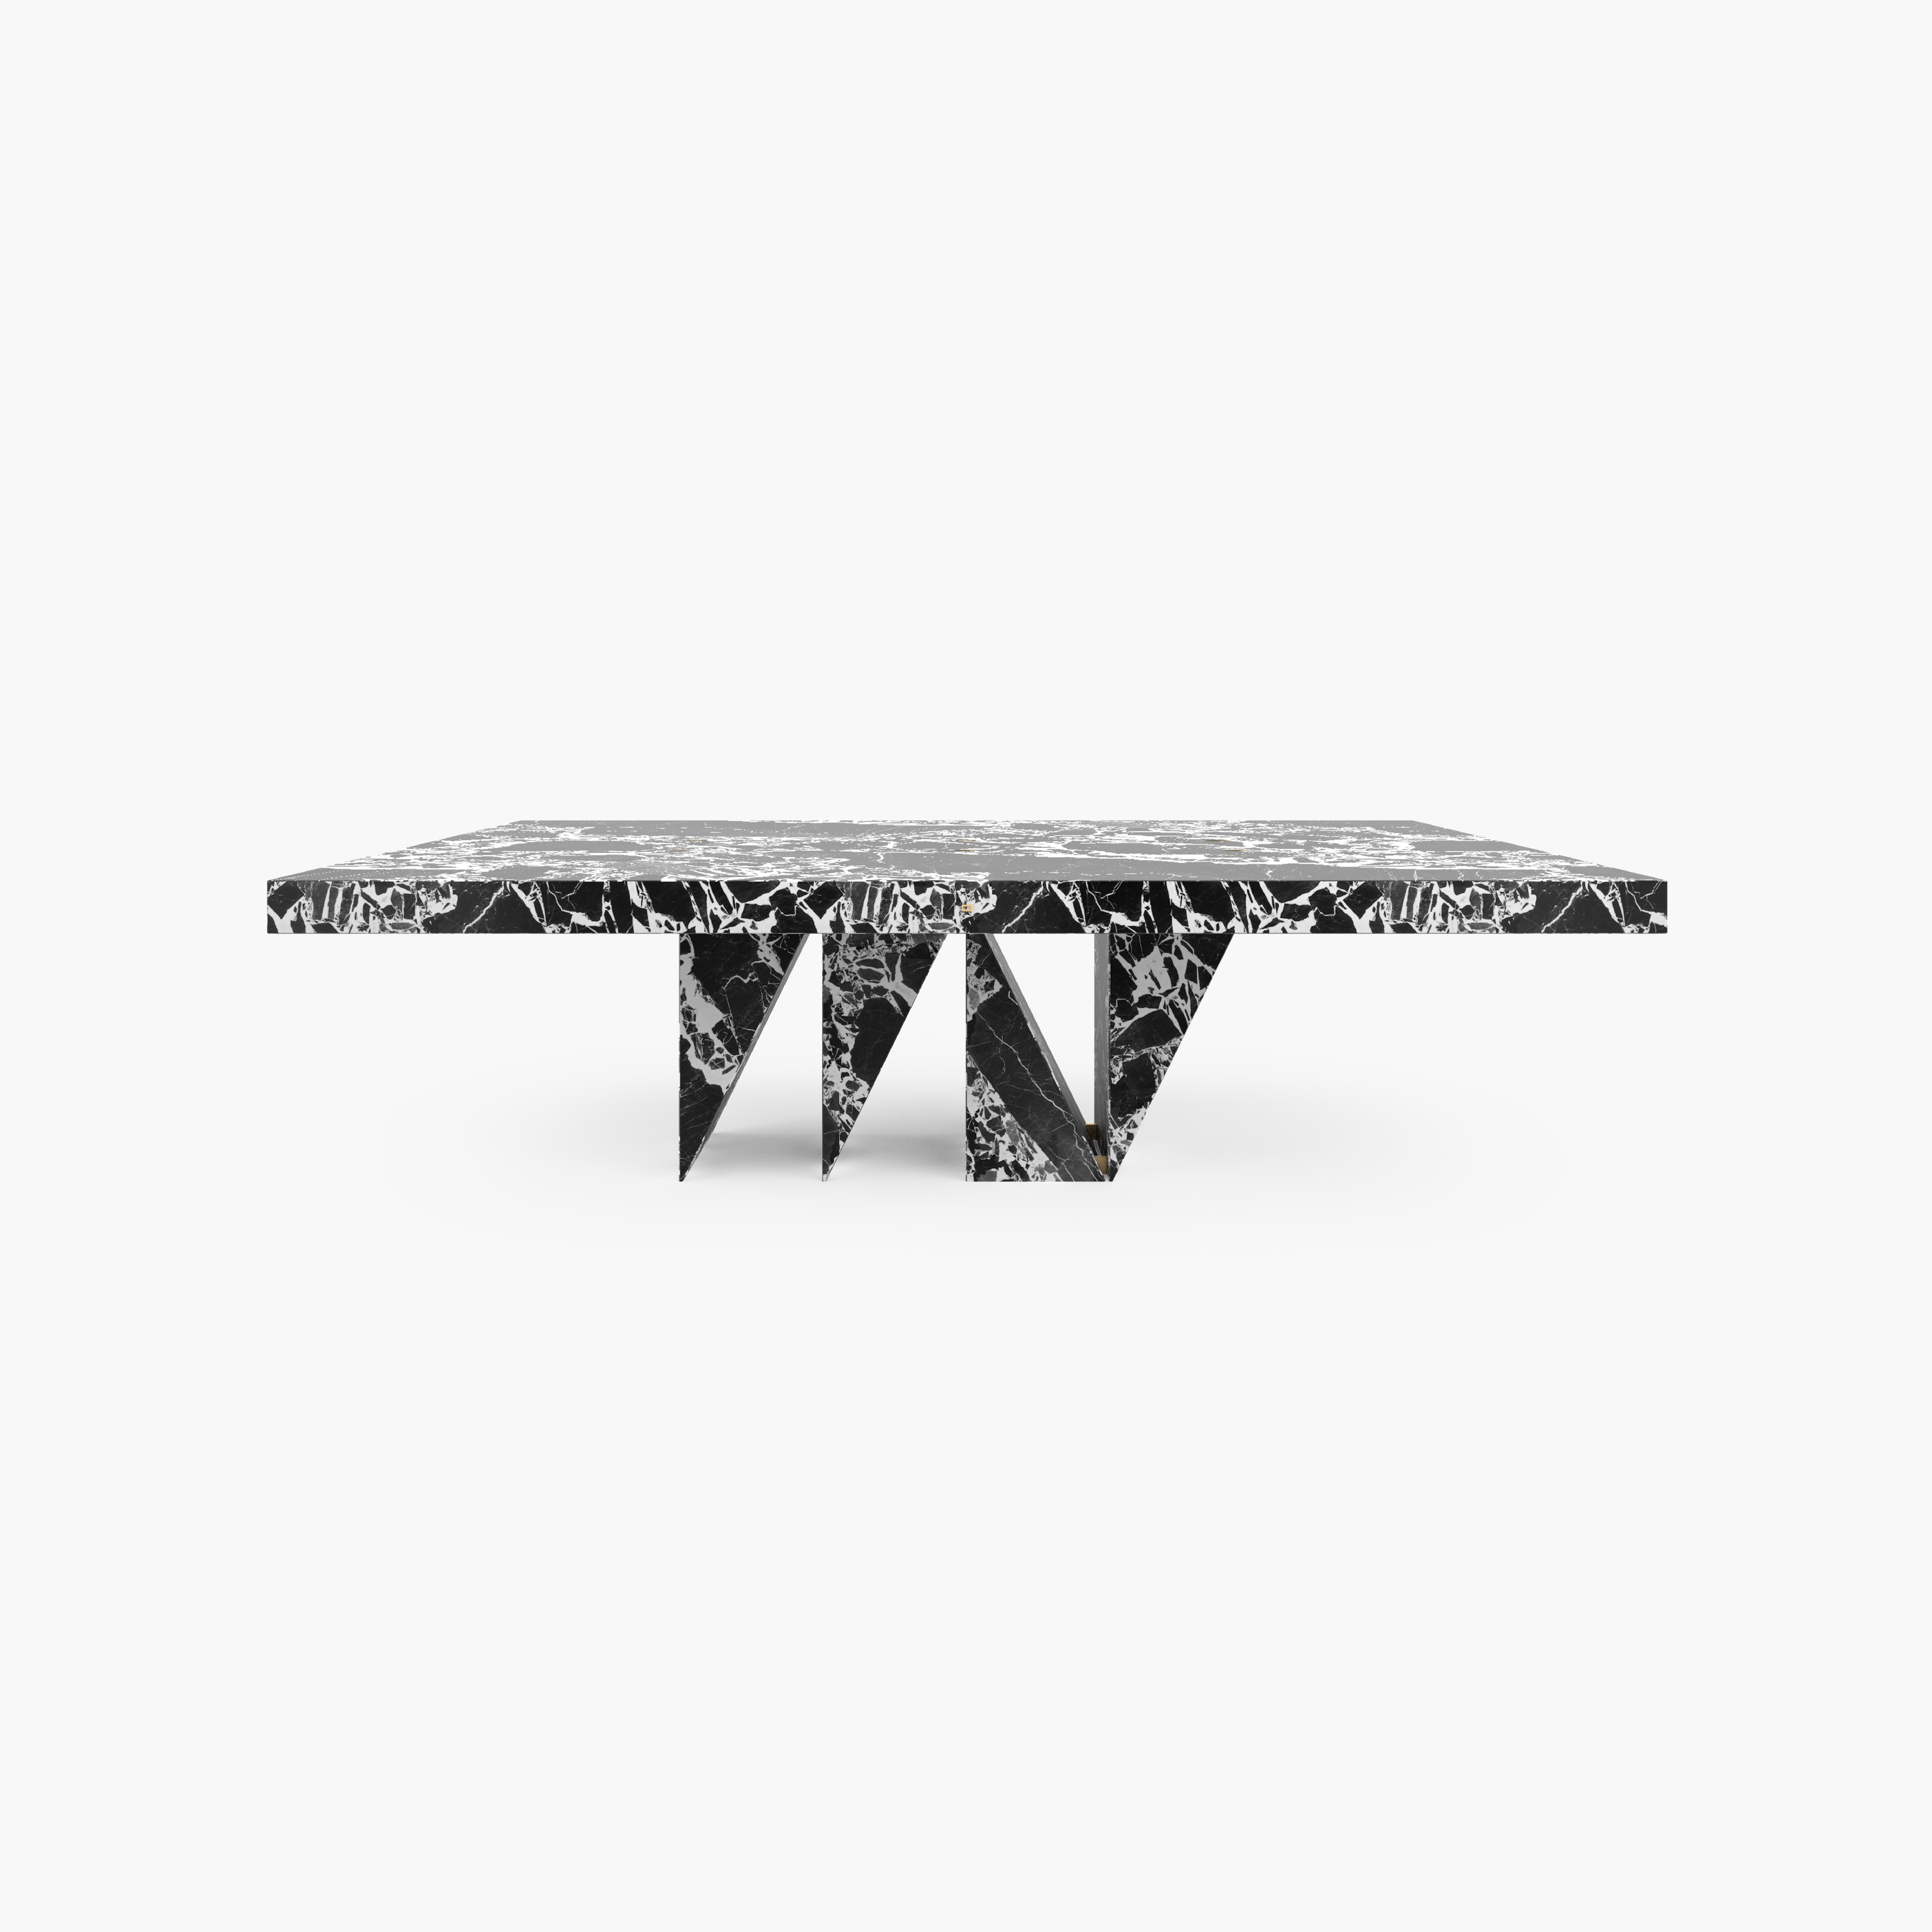 Dining Table
by FELIX SCHWAKE

FS 174-b
CM L260  B142 H78
IN L102,36  B55,91 H30,71
Grand Antique Marble, black - white

2023

Individual dimensions and surfaces on request

Functional Art Sculpture.
One of a kind piece. 
Made to order by award